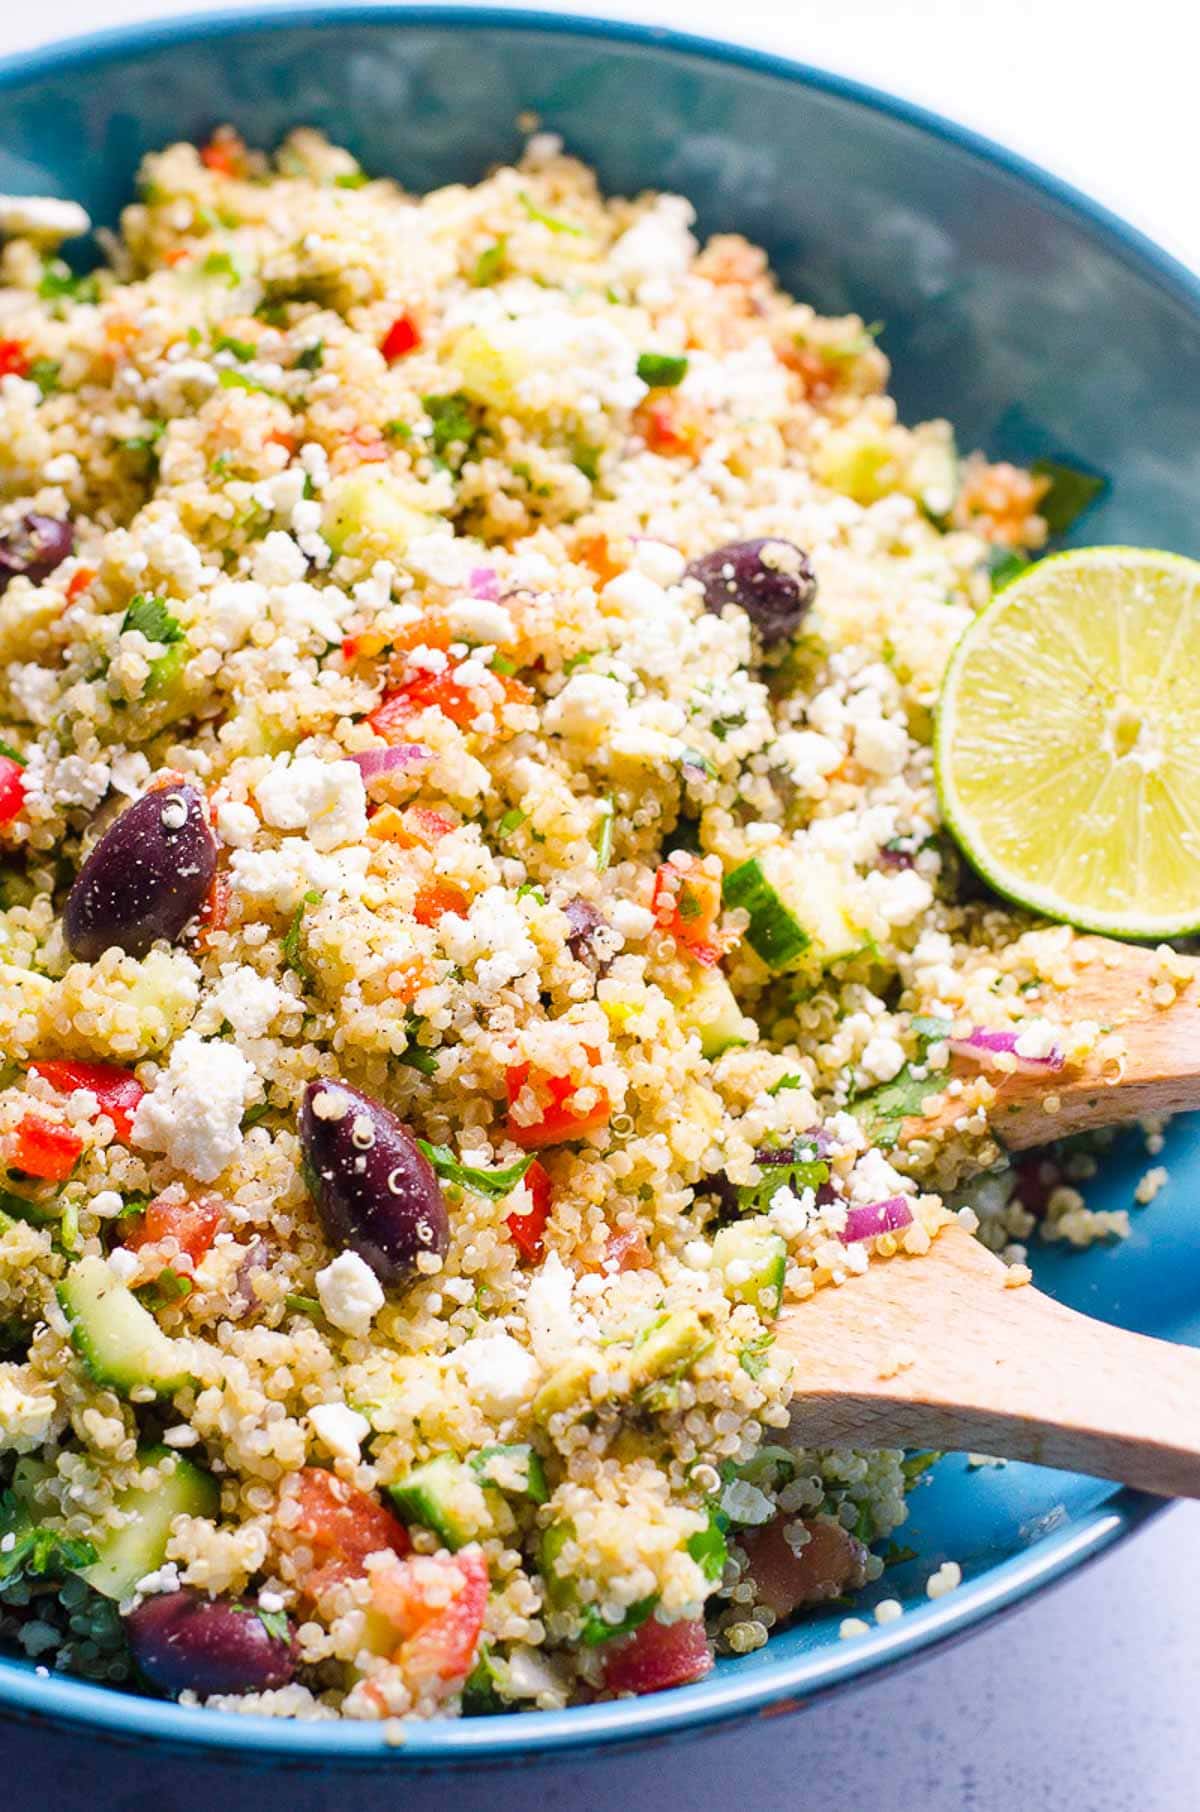 Mediterranean quinoa salad with feta, lime and wooden serving spoons in blue bowl.